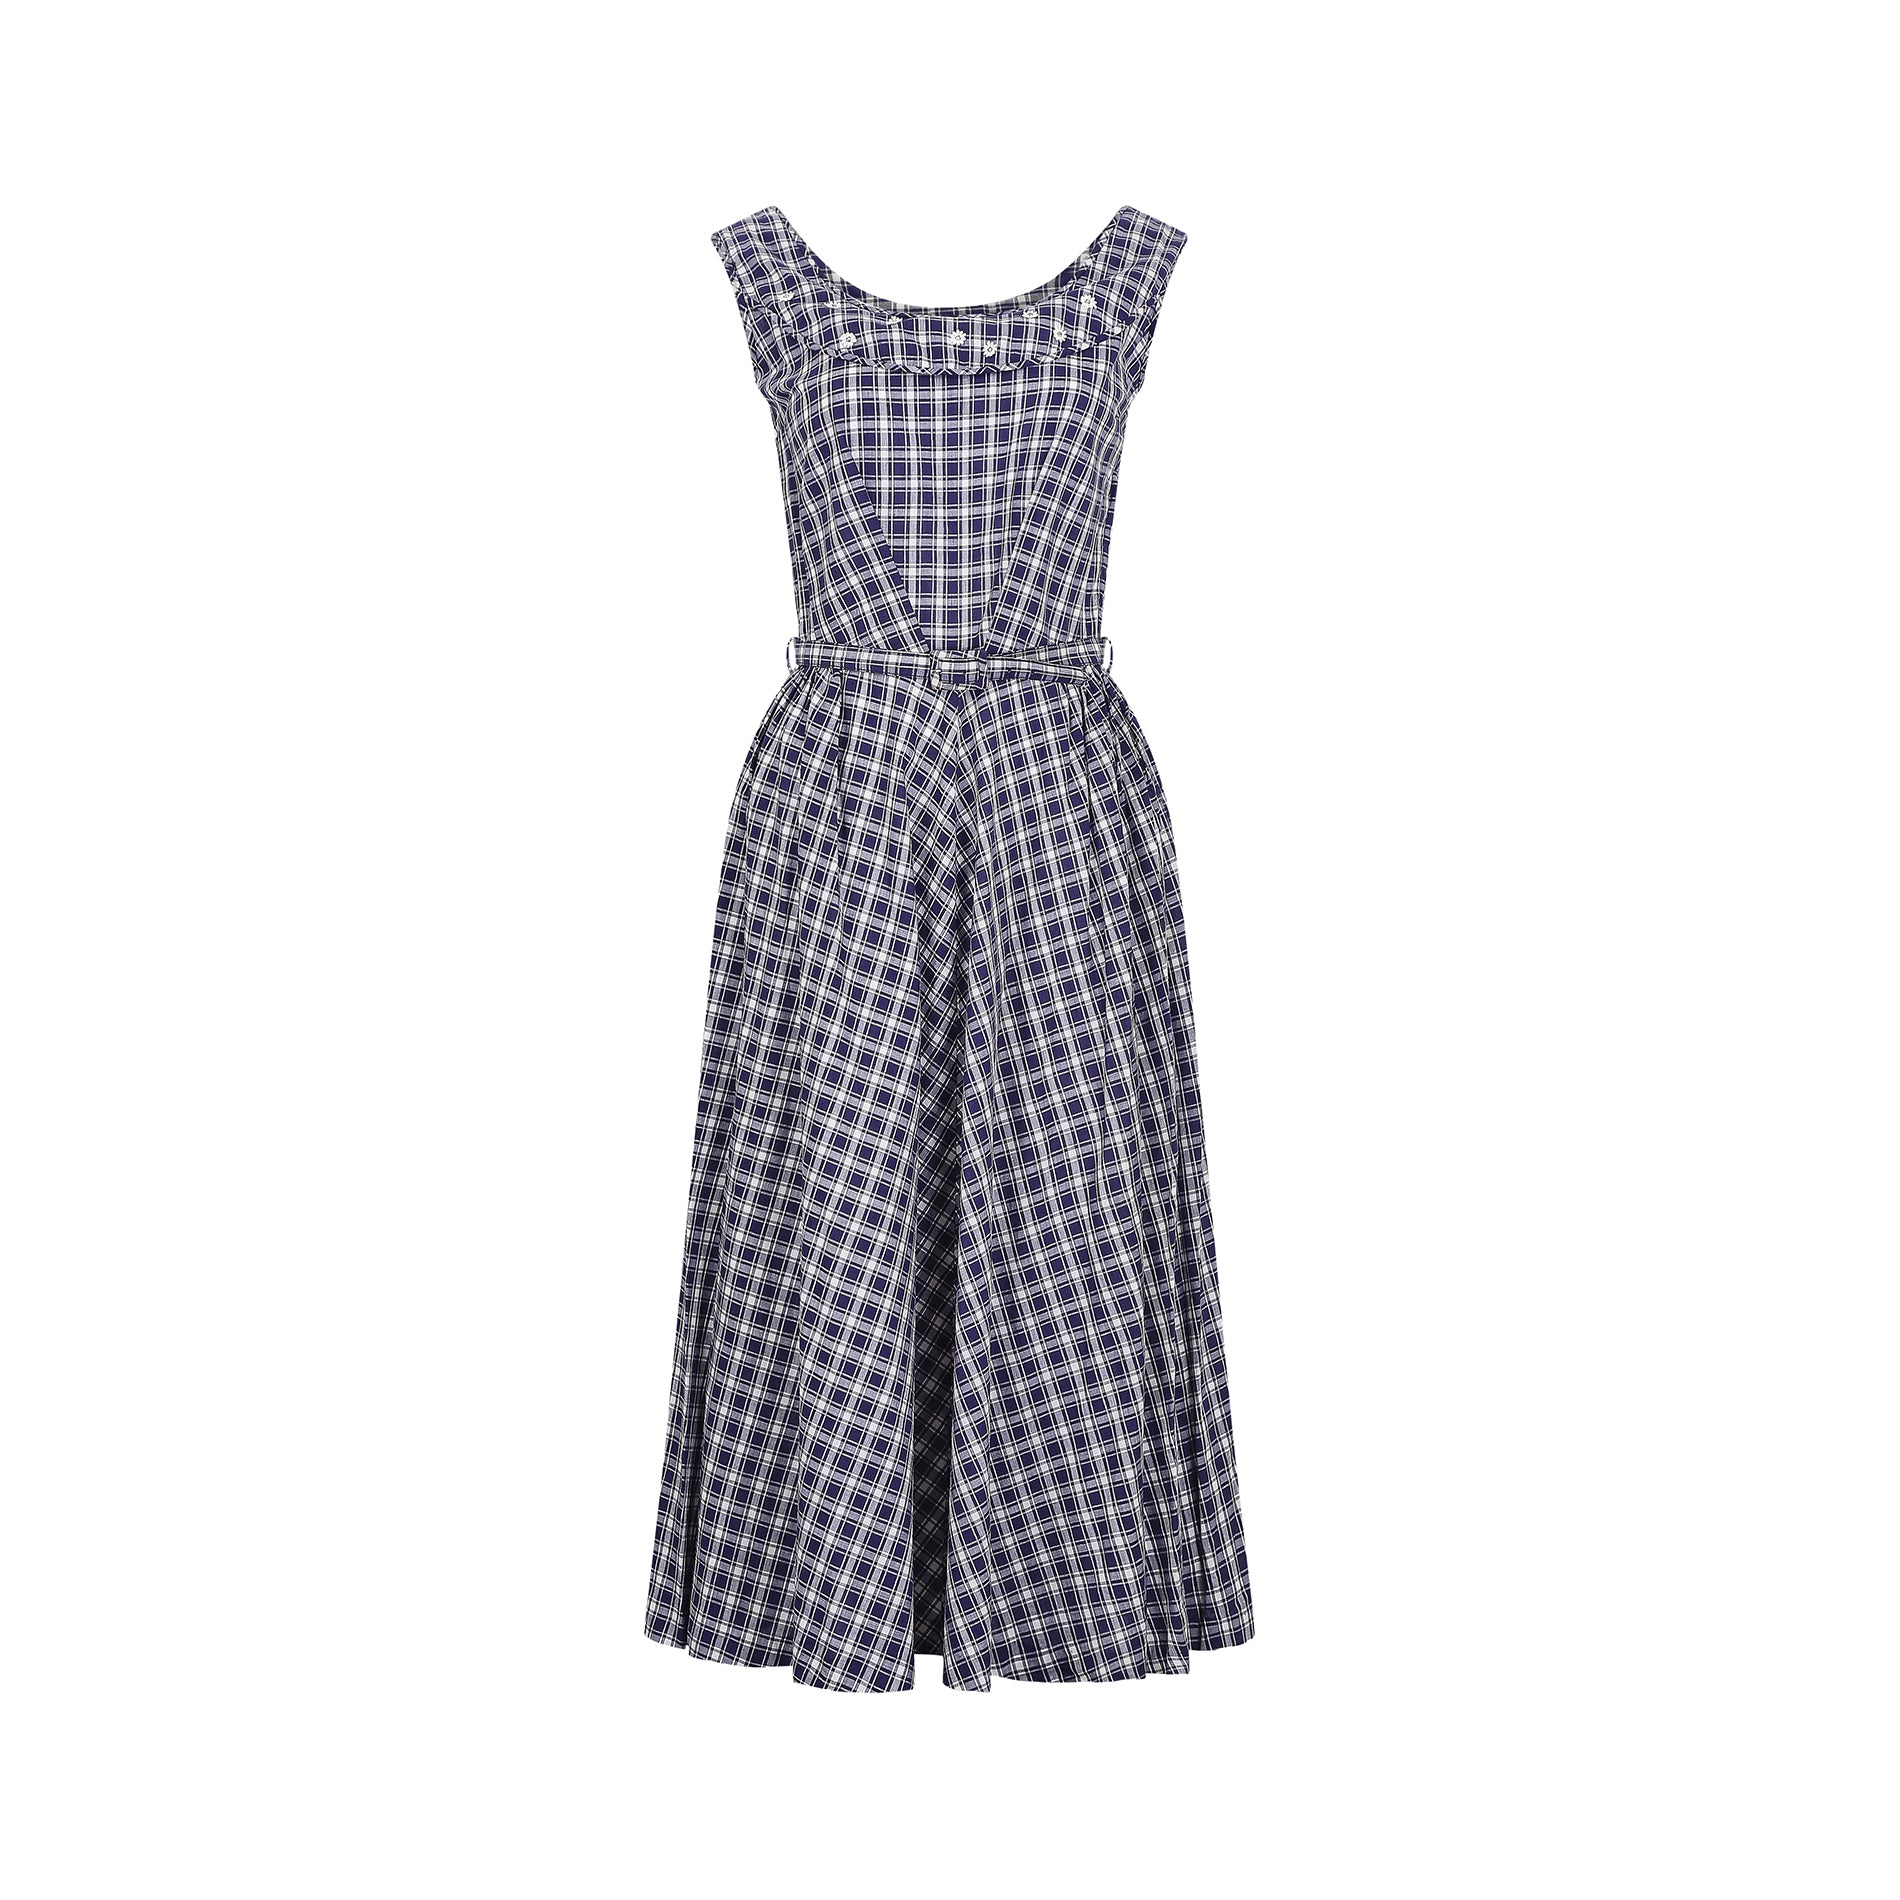 1960s Blue and White Gingham Dress